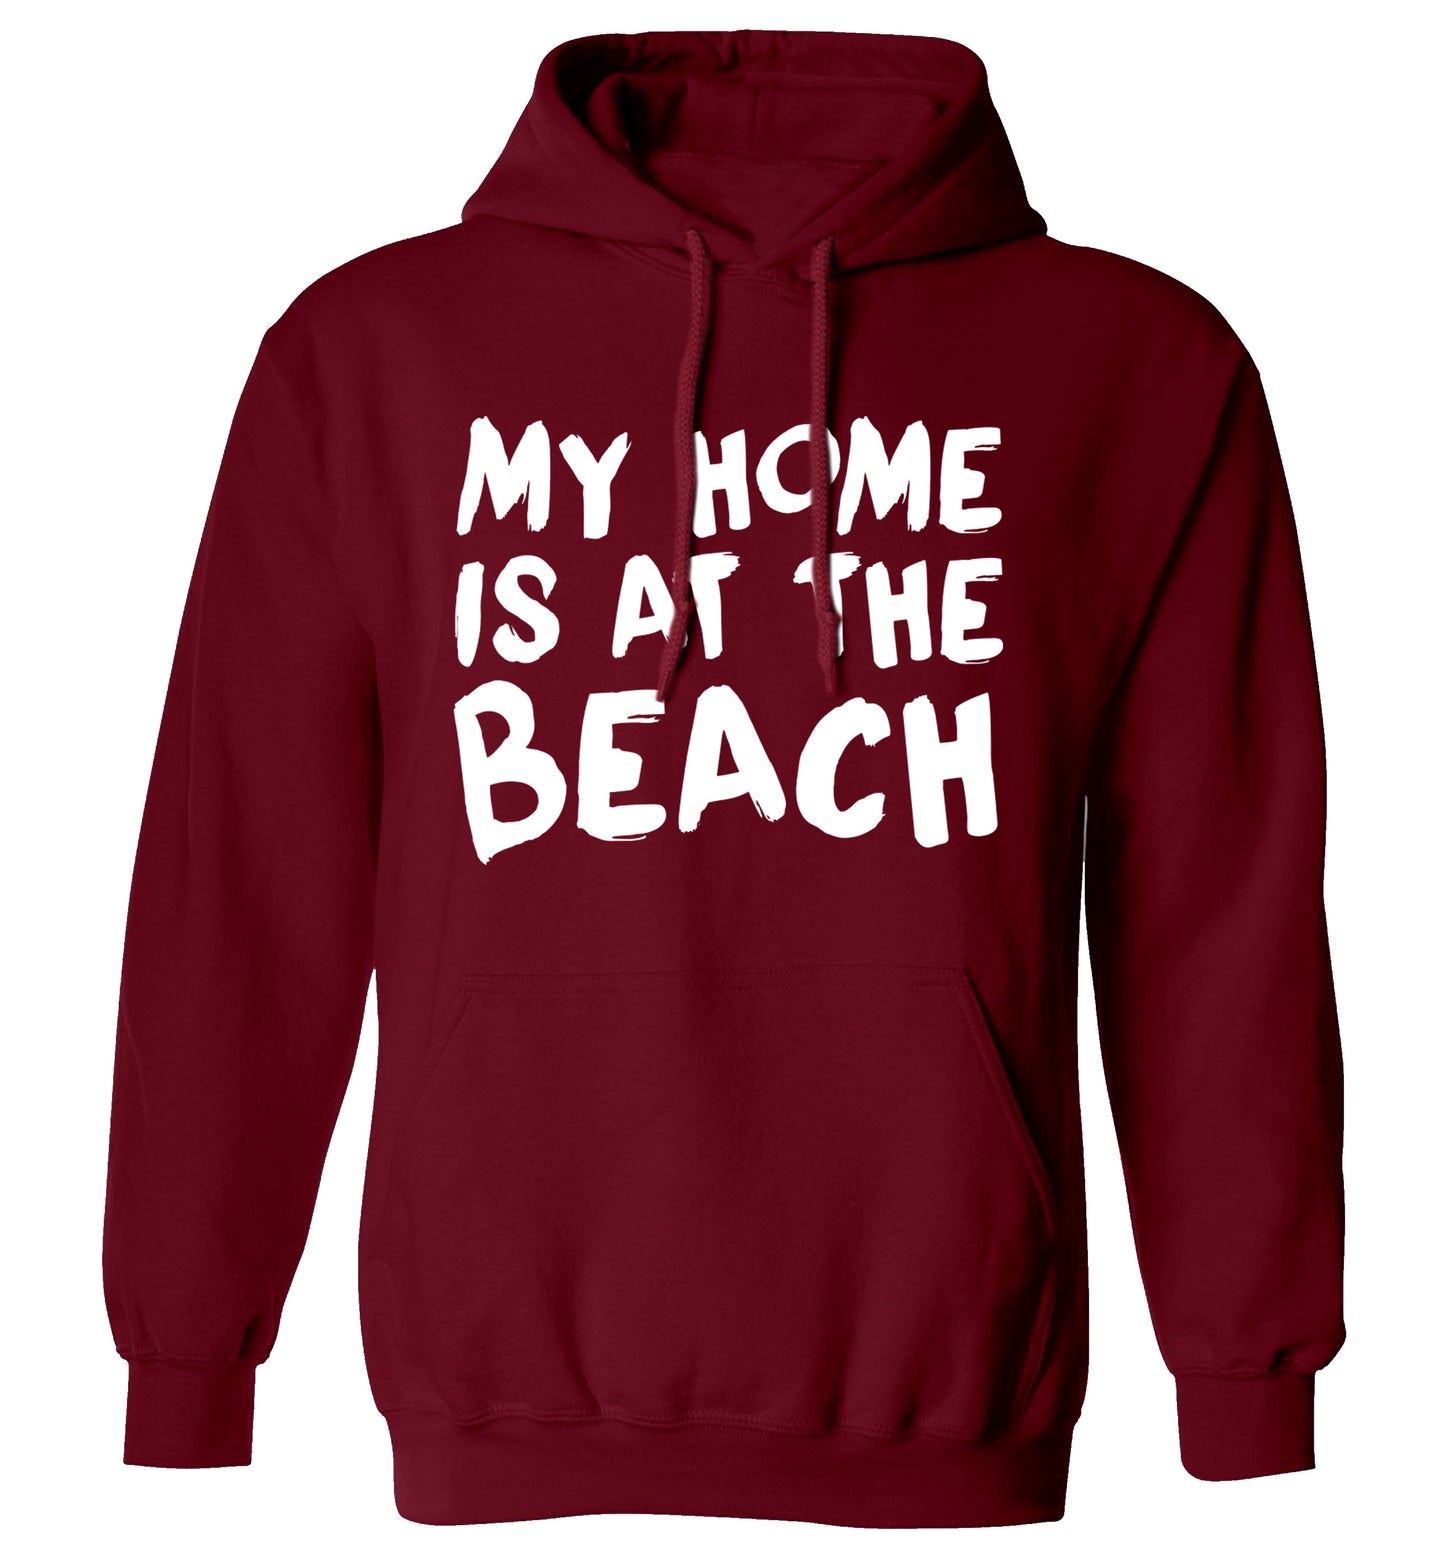 My home is at the beach adults unisex maroon hoodie 2XL